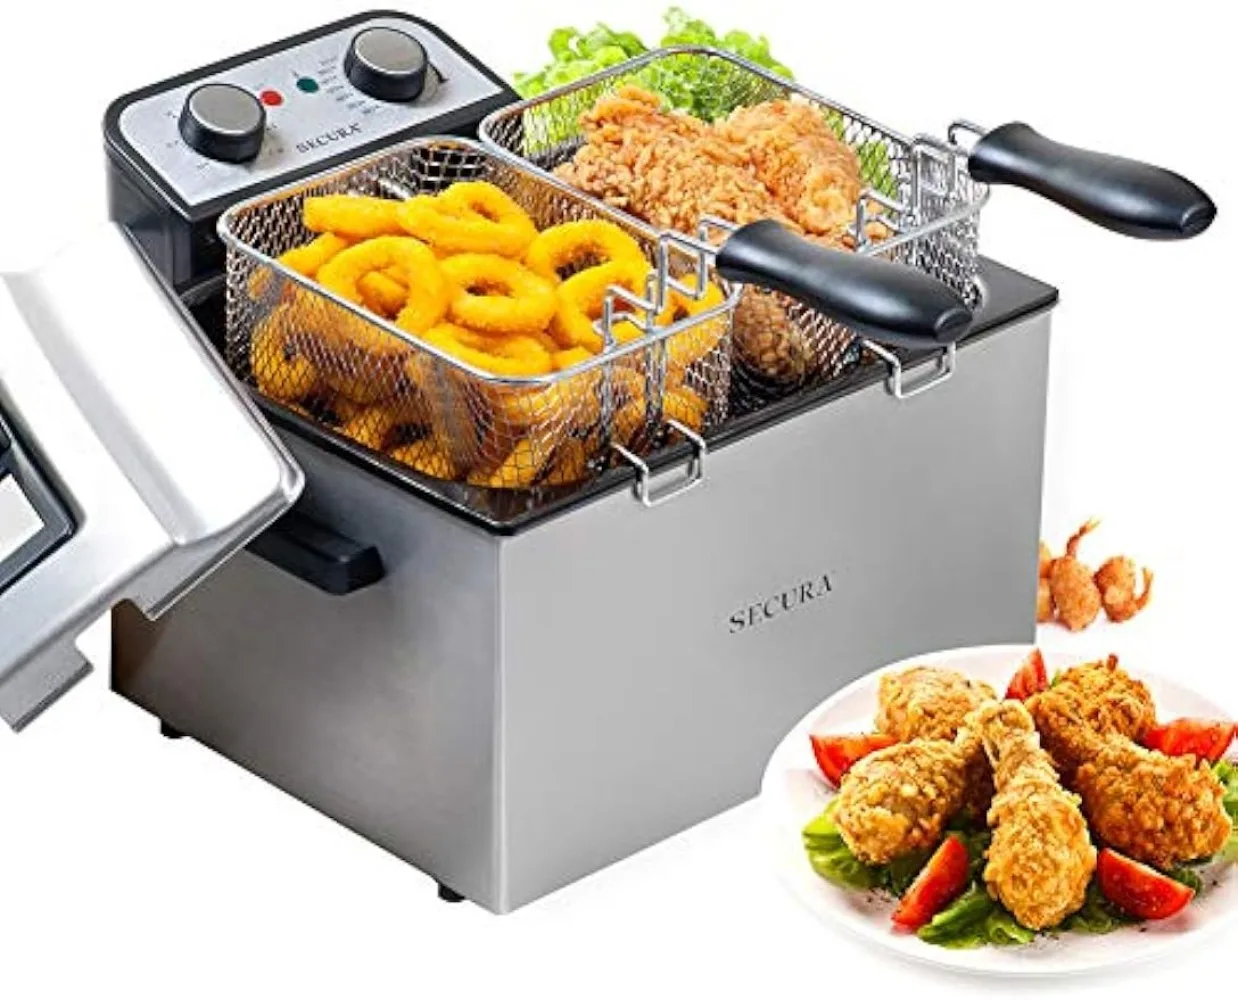 

Secura Electric Deep Fryer 1800W-Watt Large 4.0L/4.2Qt Professional Grade Stainless Steel with Triple Basket and Timer,Gray